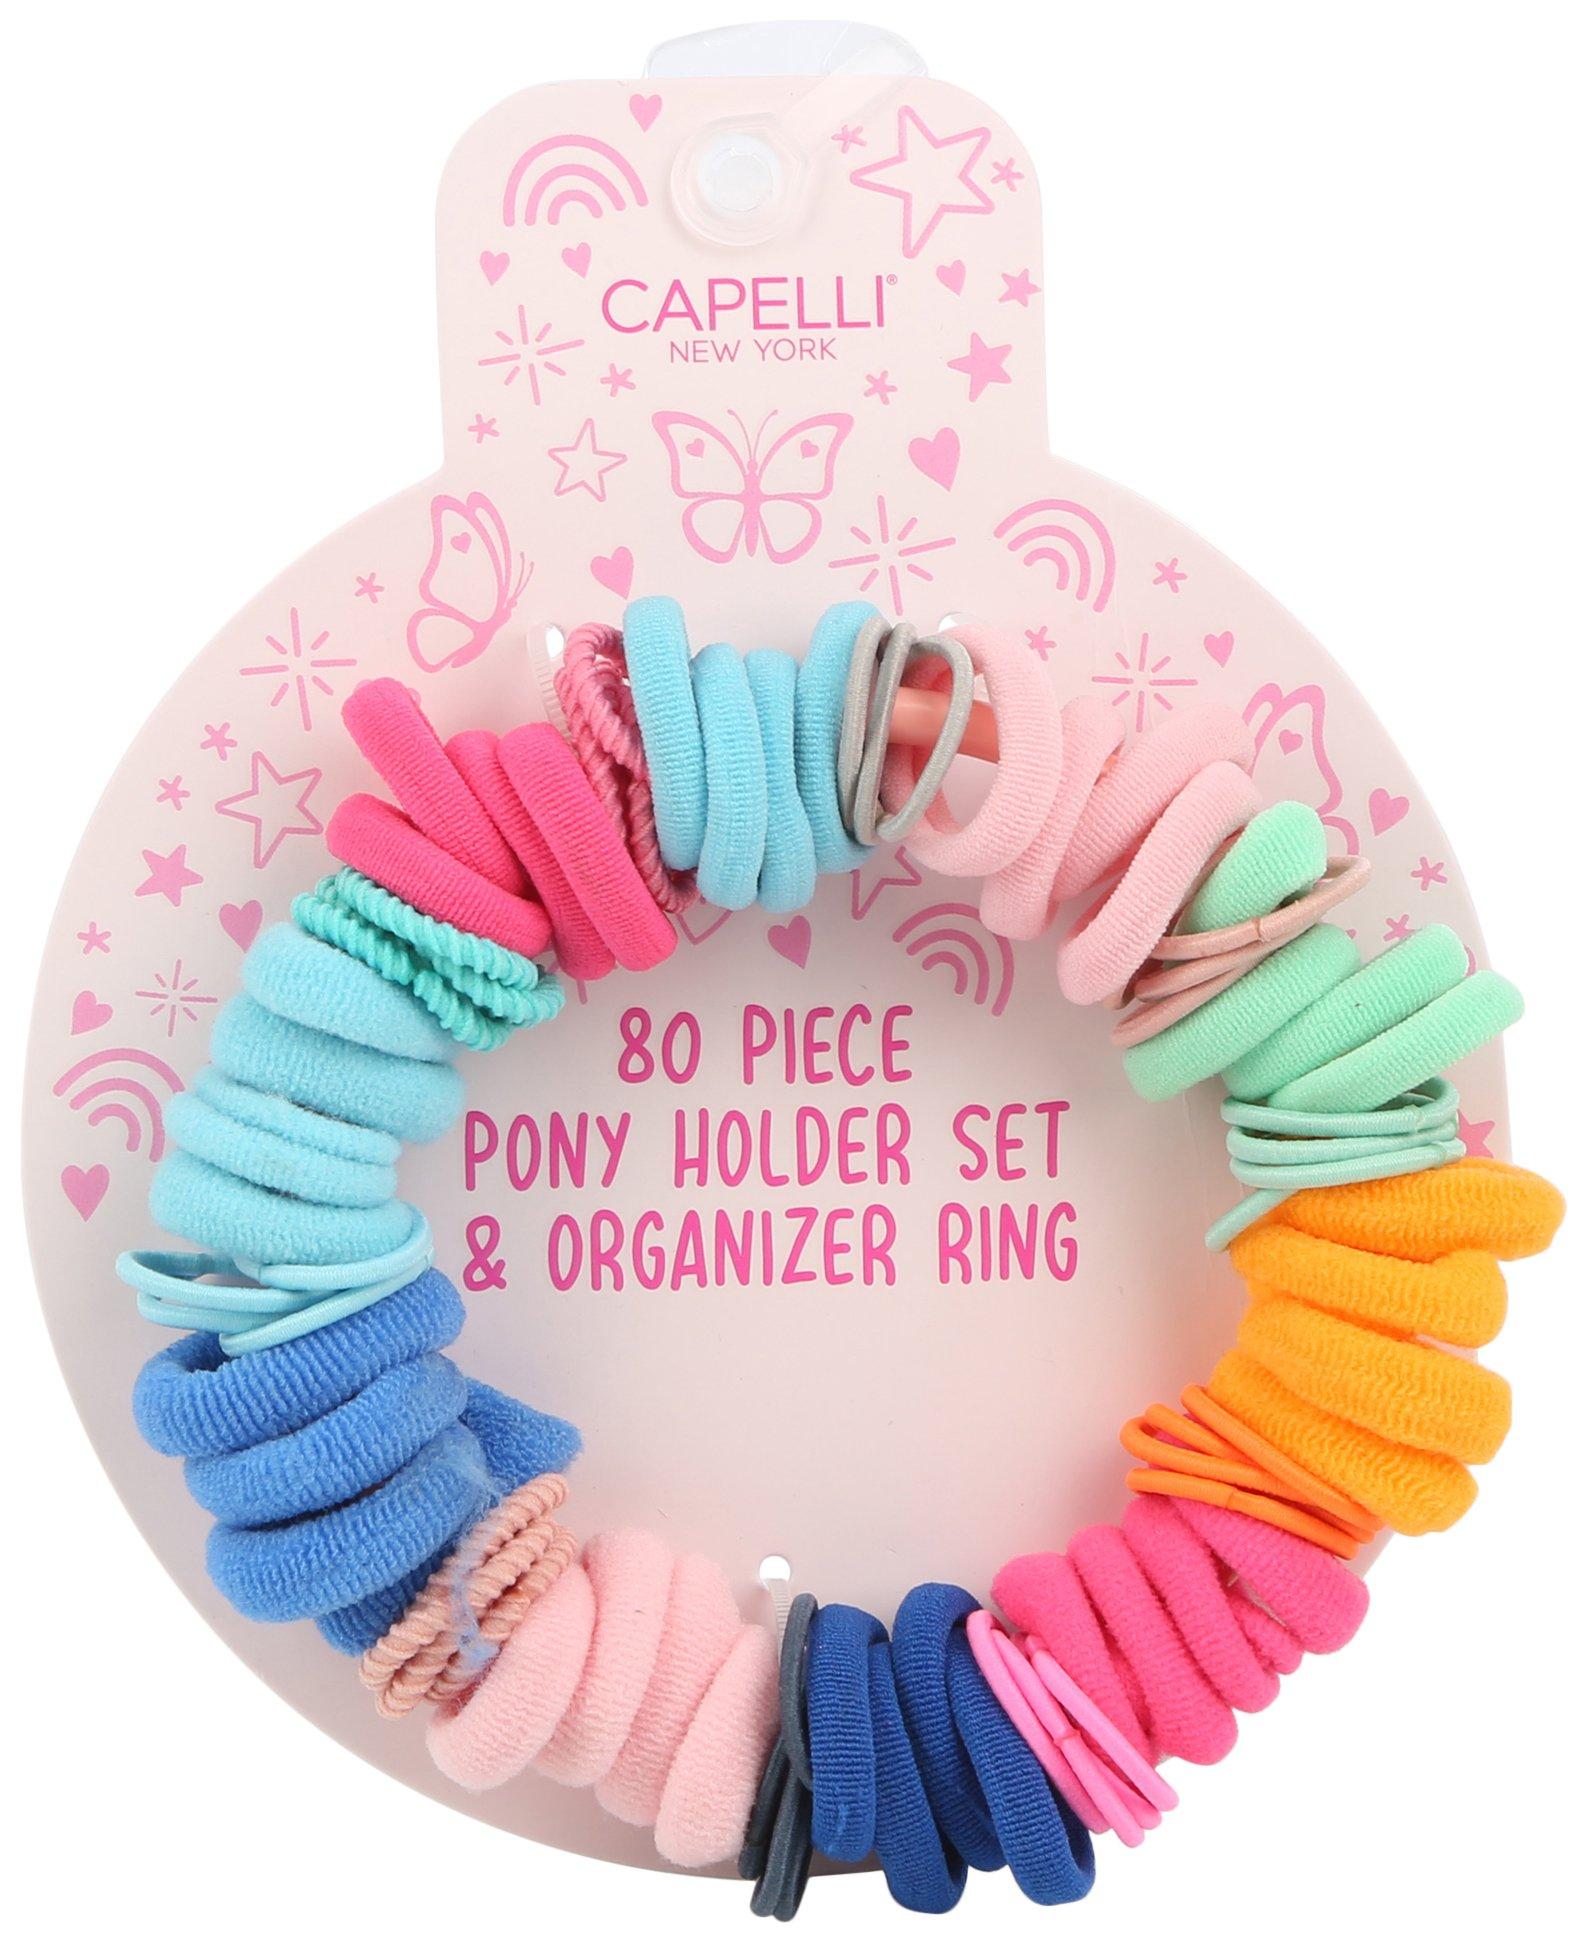 Capelli NY Girls 80pk. Hair Tie Collection Set